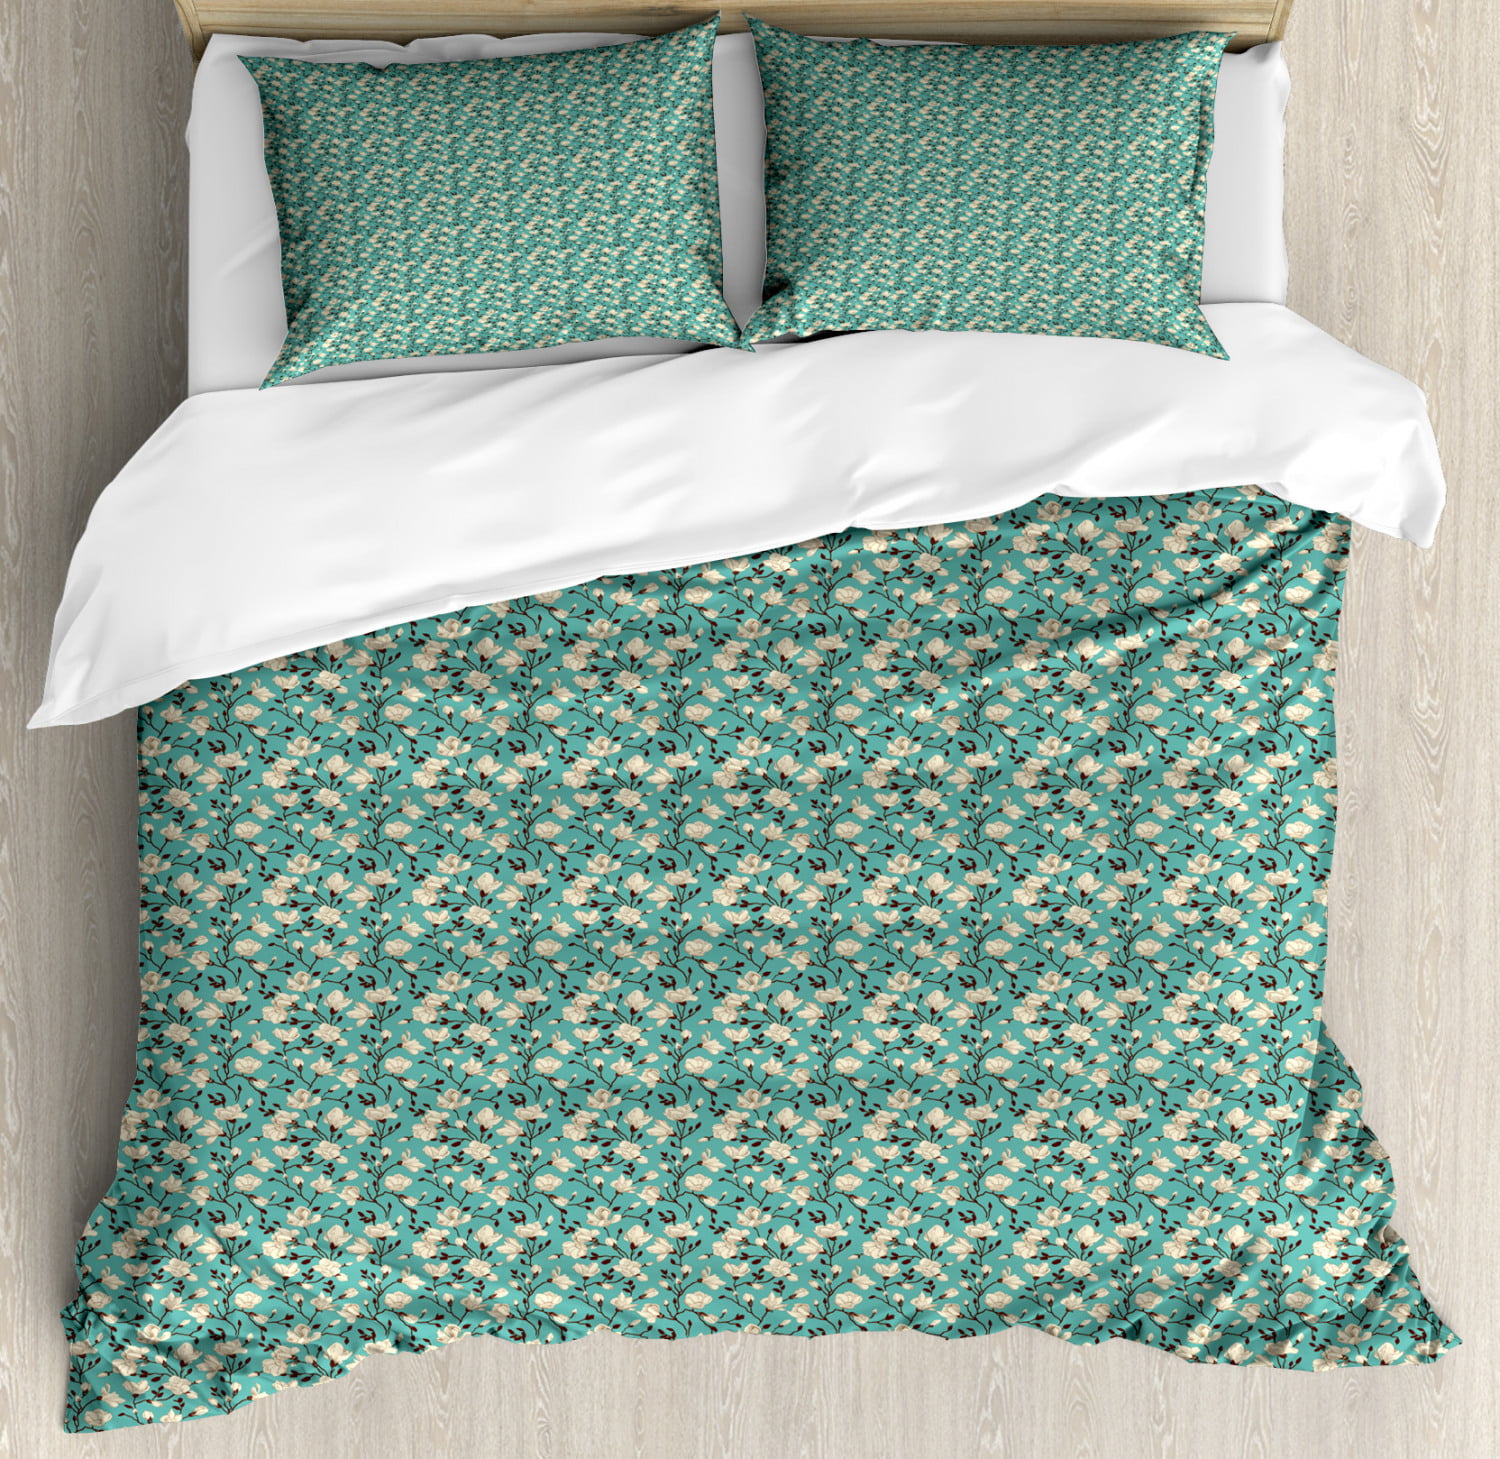 Floral Queen Size Duvet Cover Set, Crooked Twiggy Branches of ...